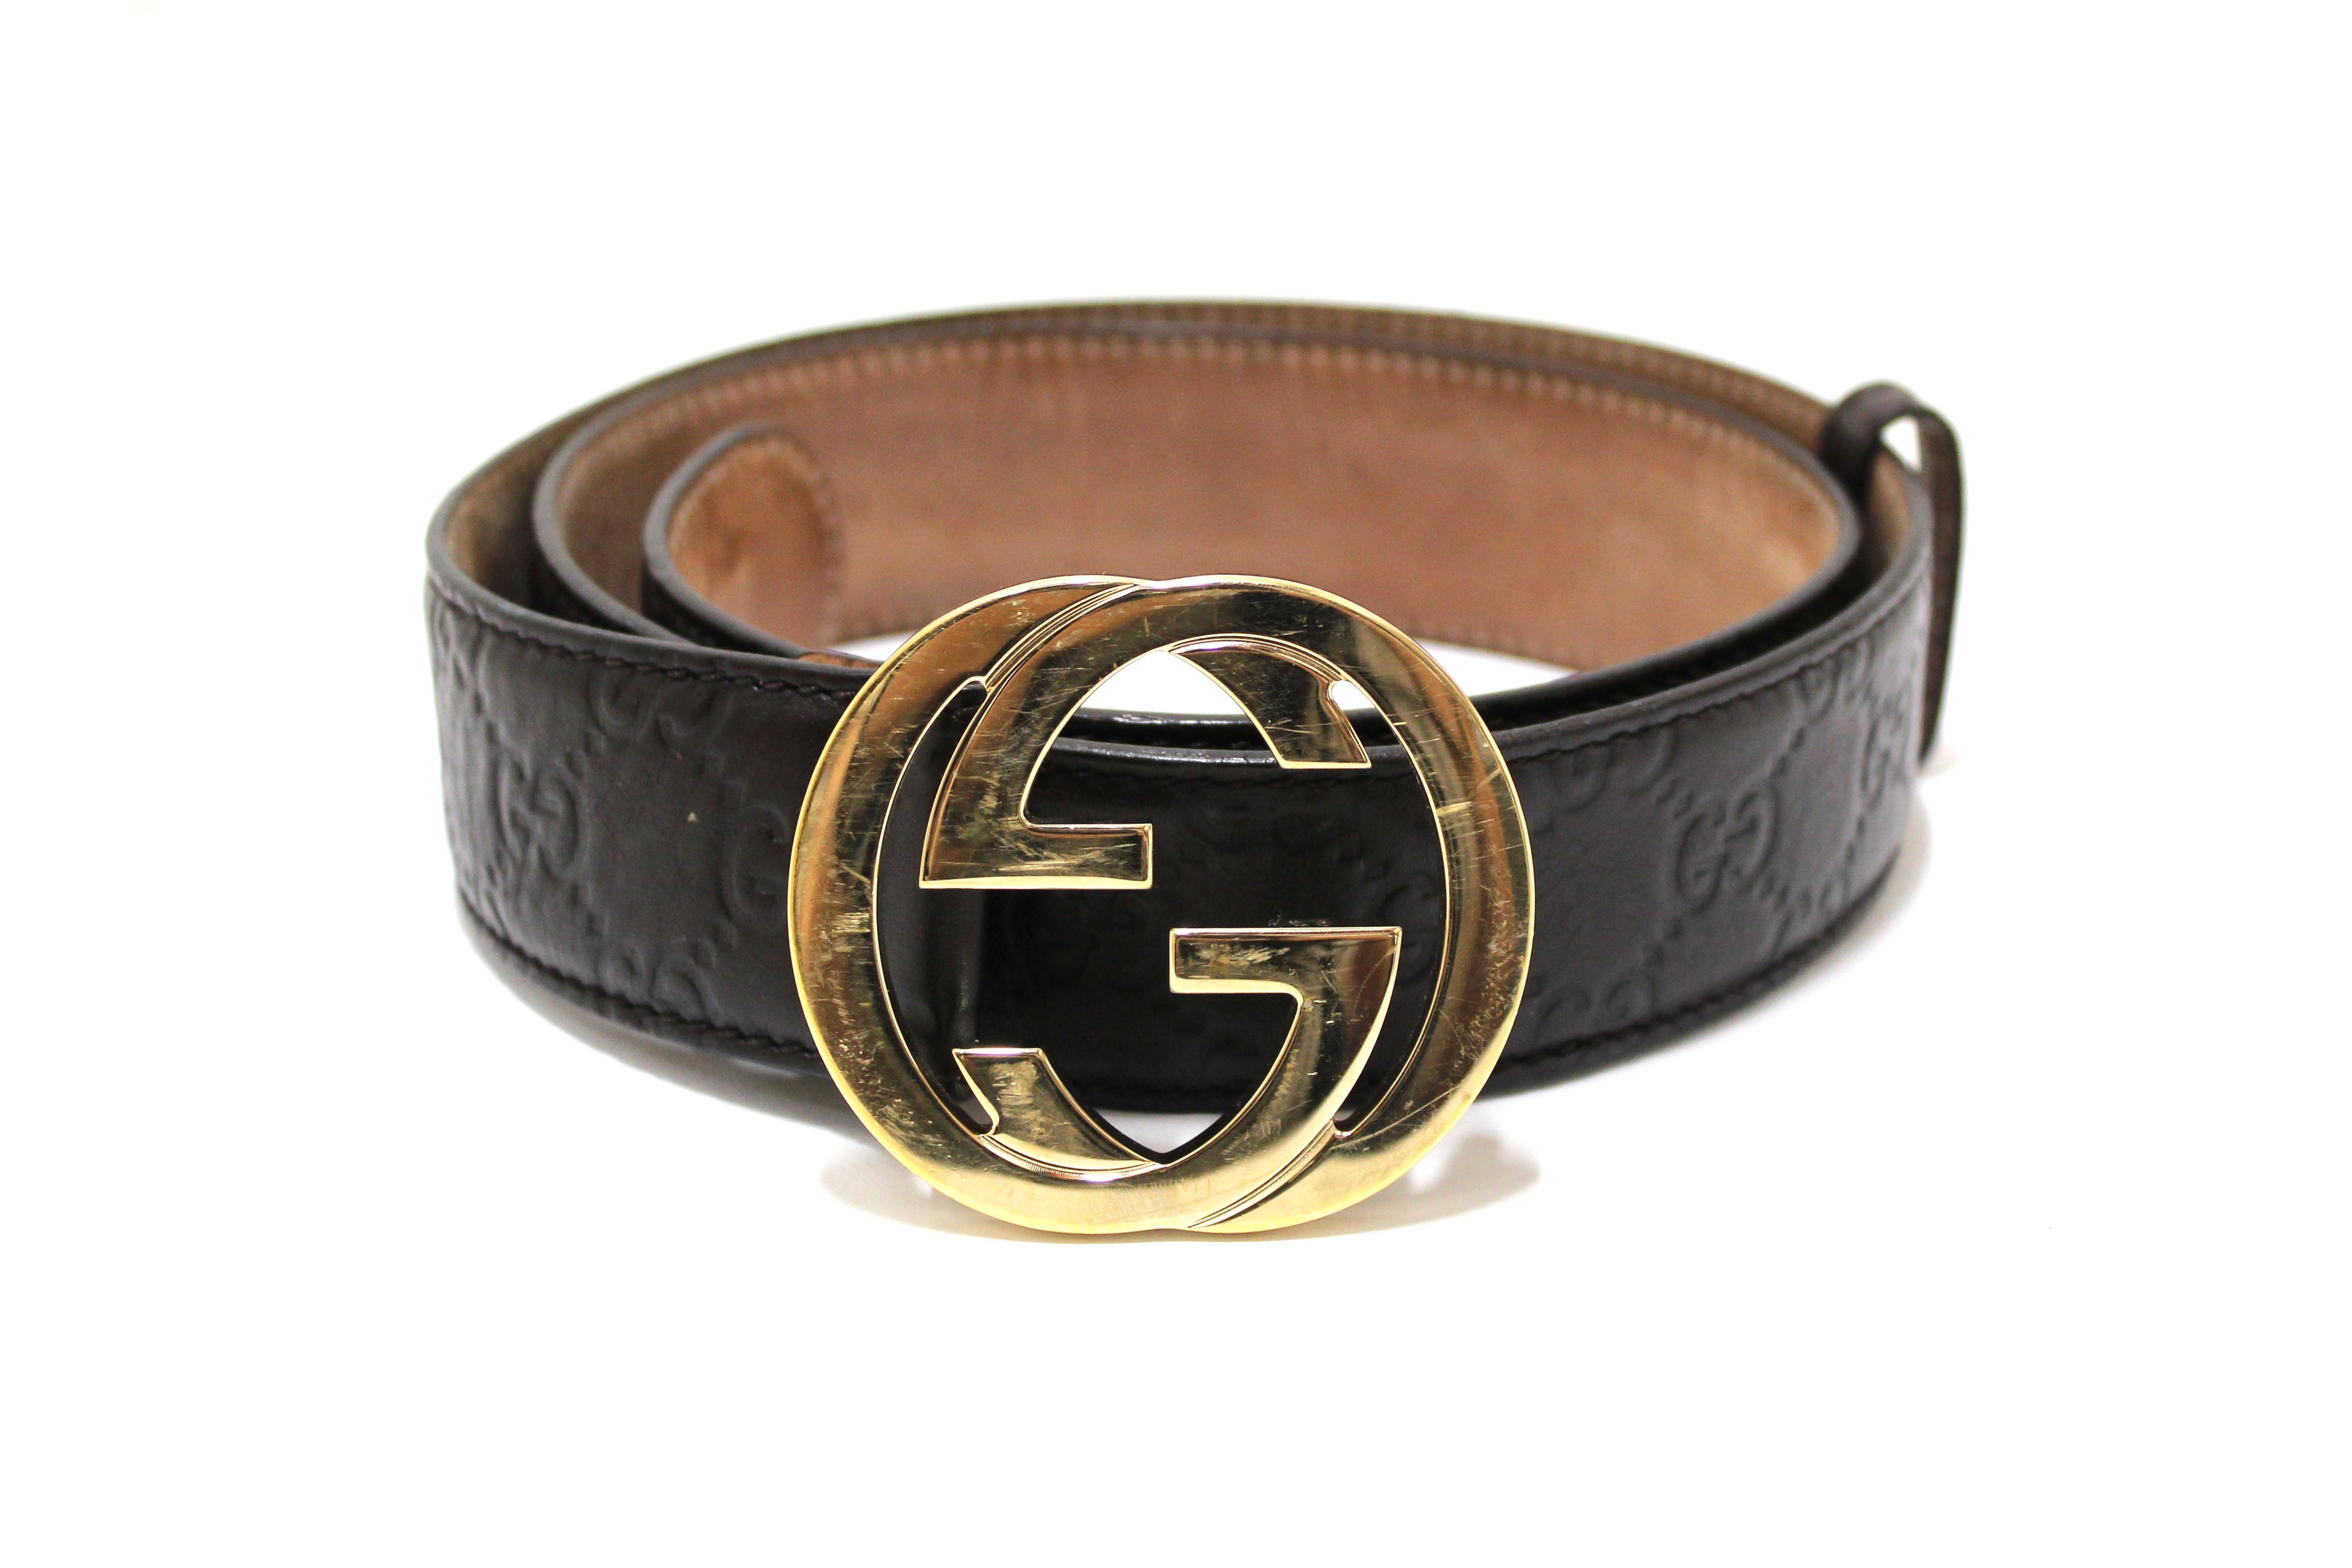 Authentic Gucci Black Signature Leather with Gold GG Buckle Belt size 38